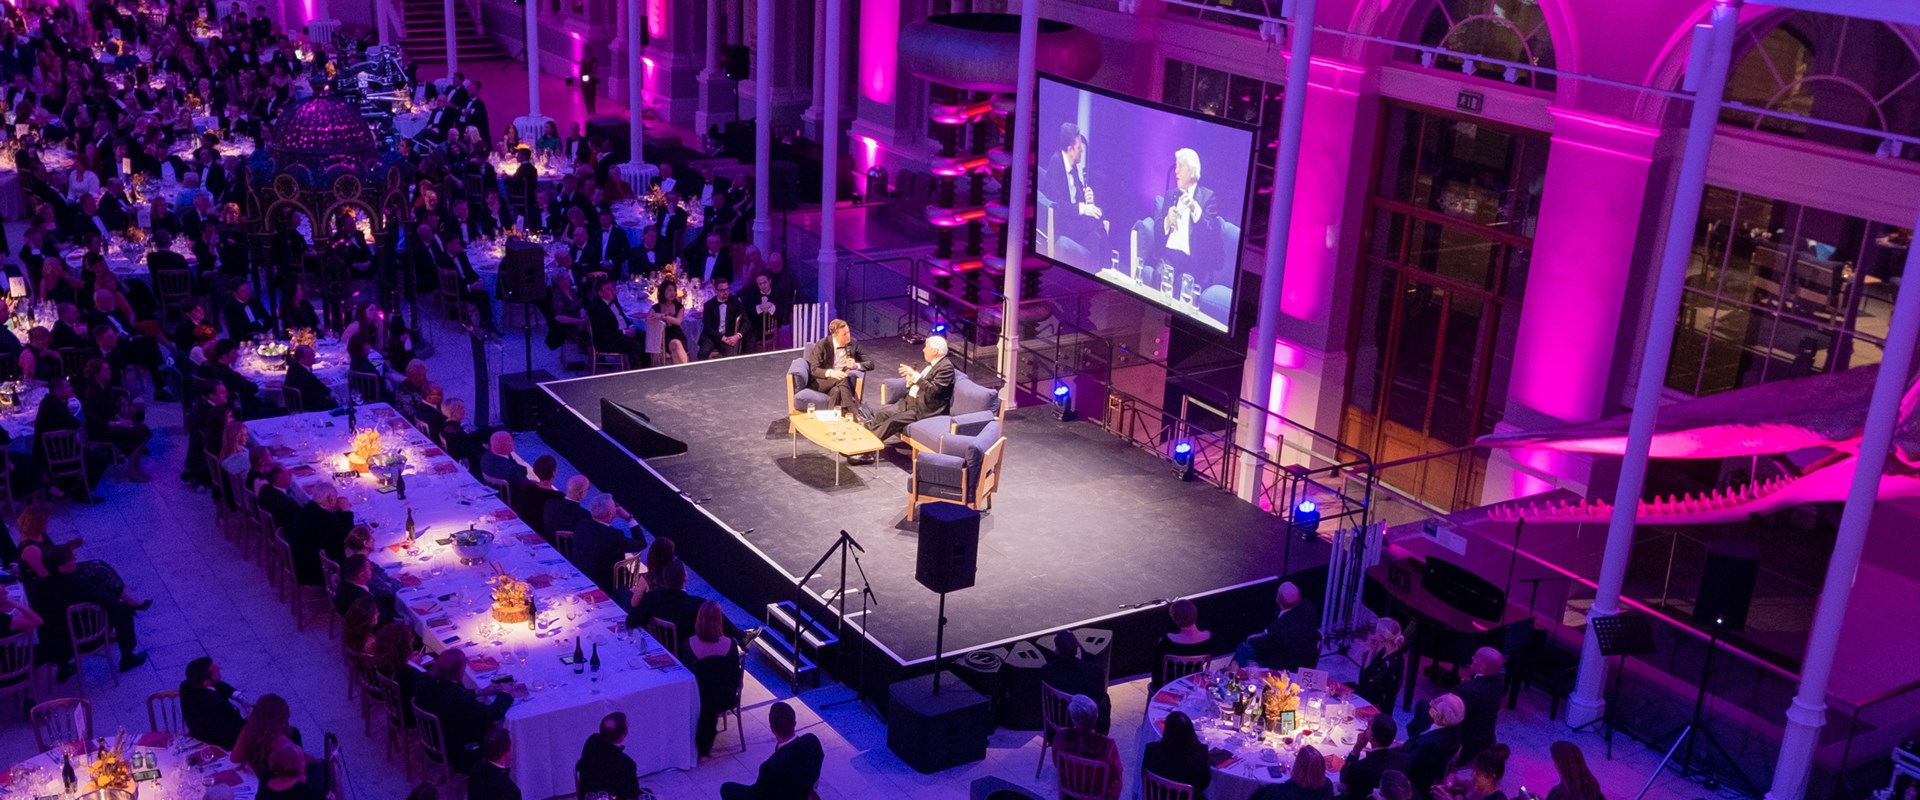 An event at the National Museum of Scotland with guest Sir David Attenborough.